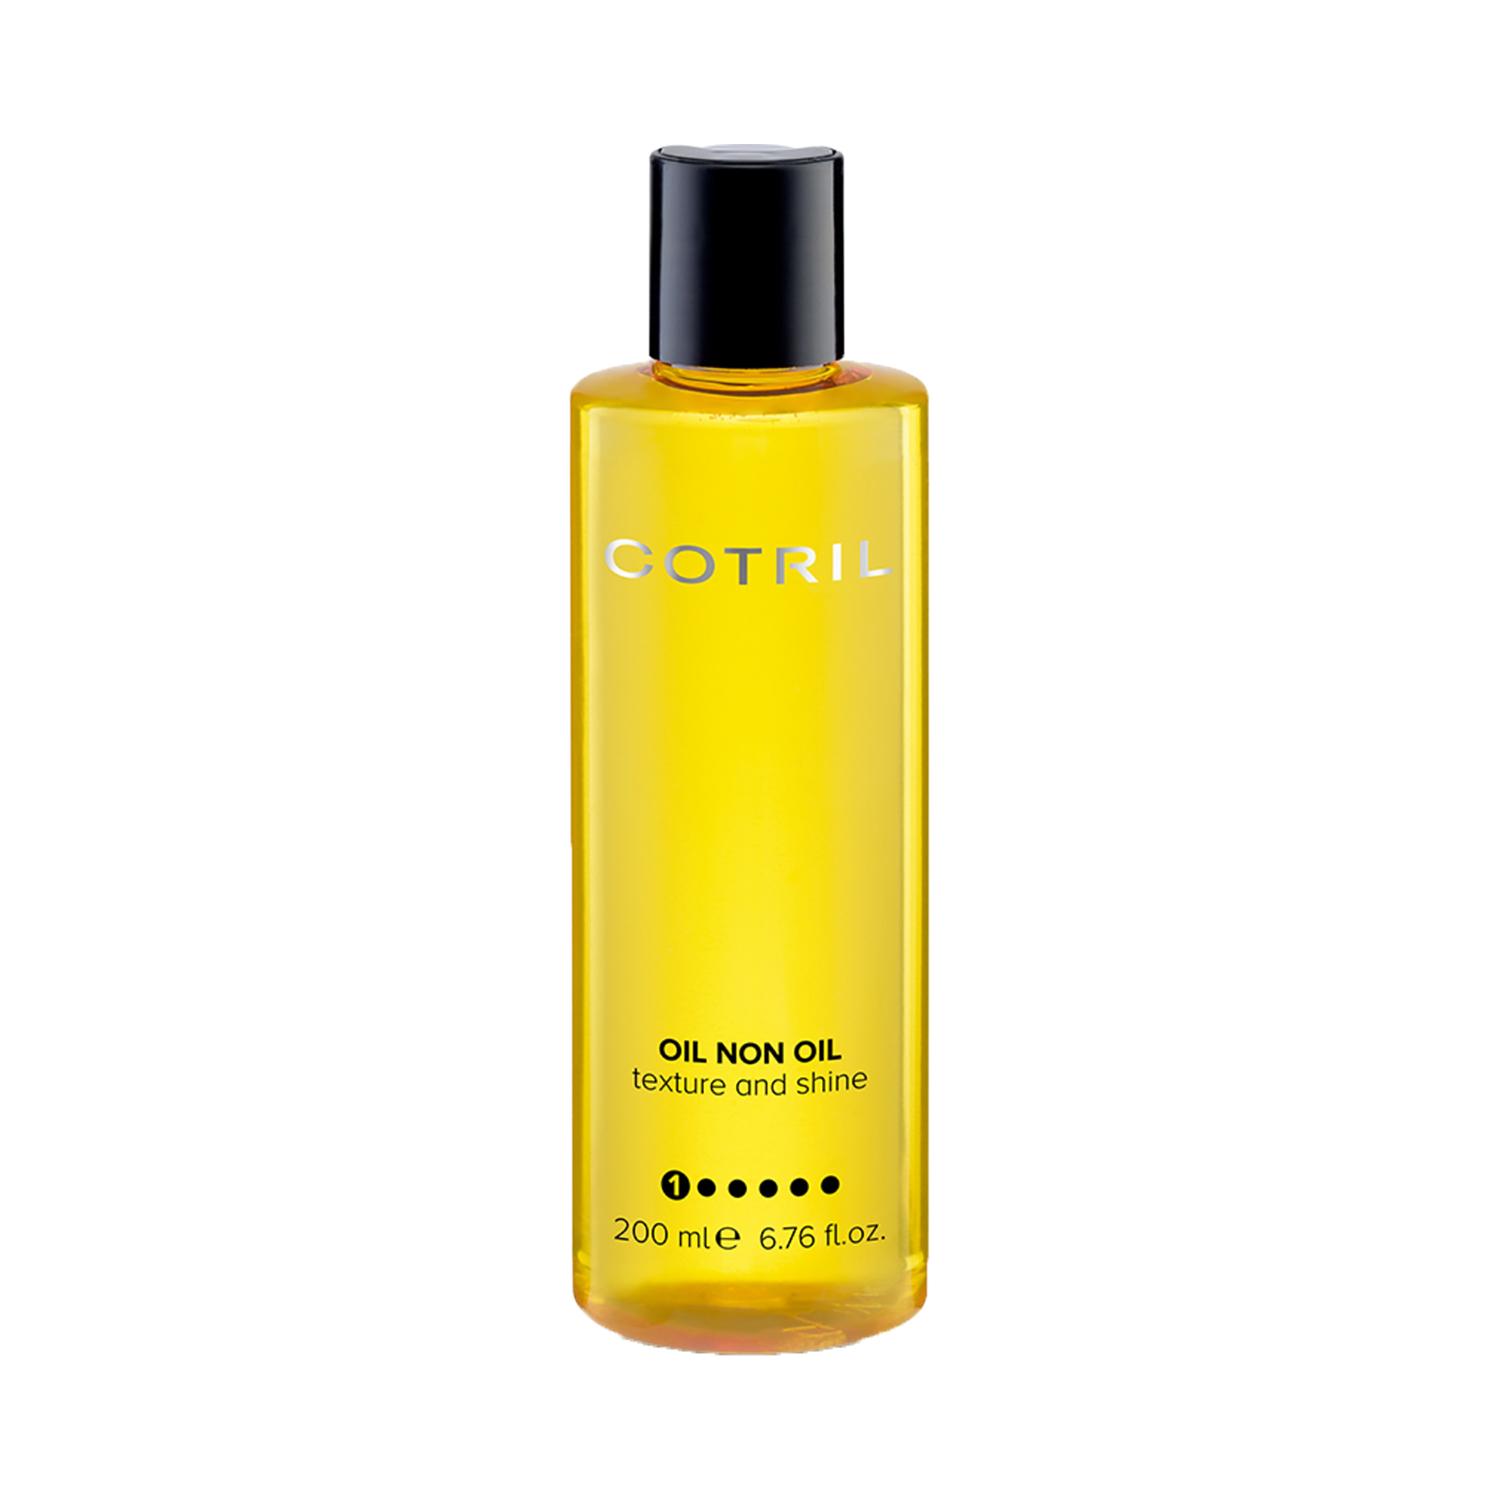 COTRIL | COTRIL Oil Non Hair Oil (200 ml)